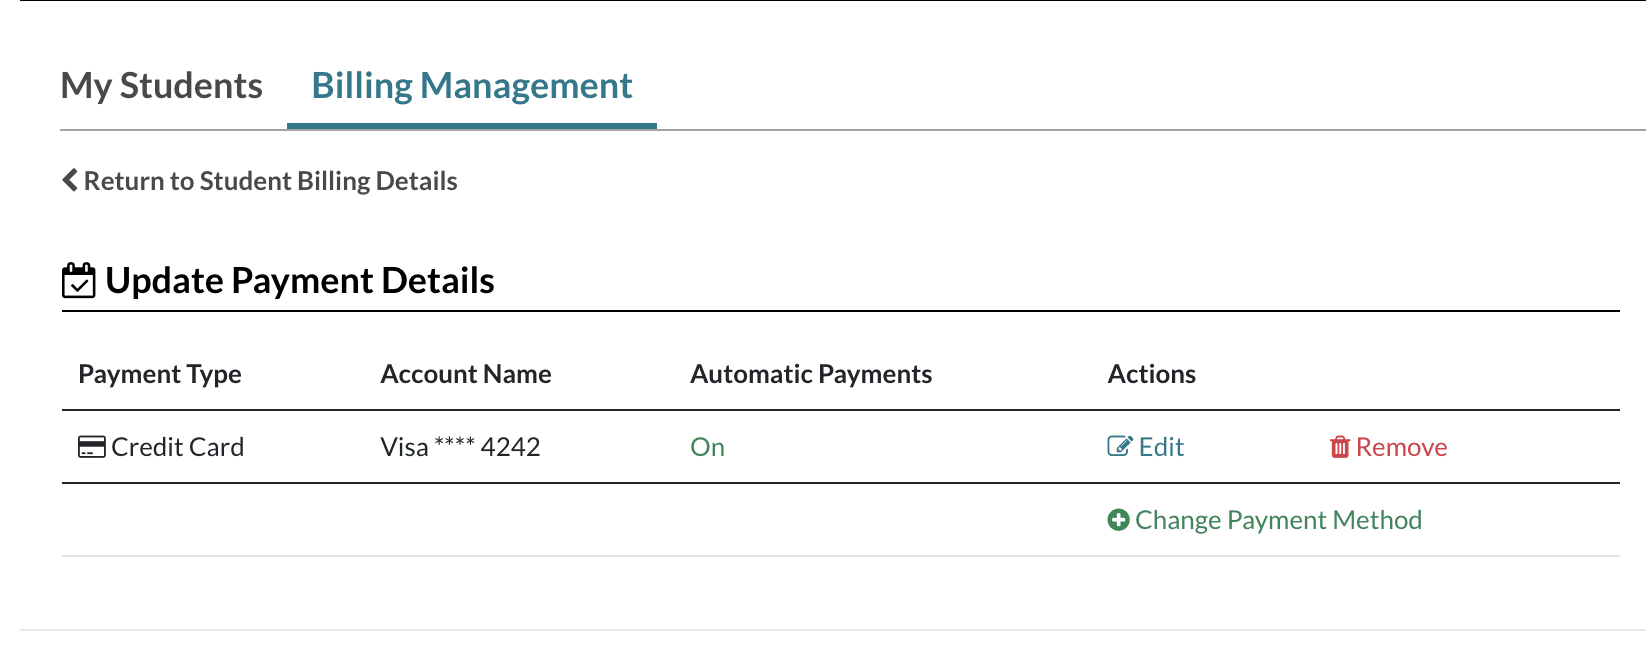 Update Payment Details page in the parent Billing Management Tab.